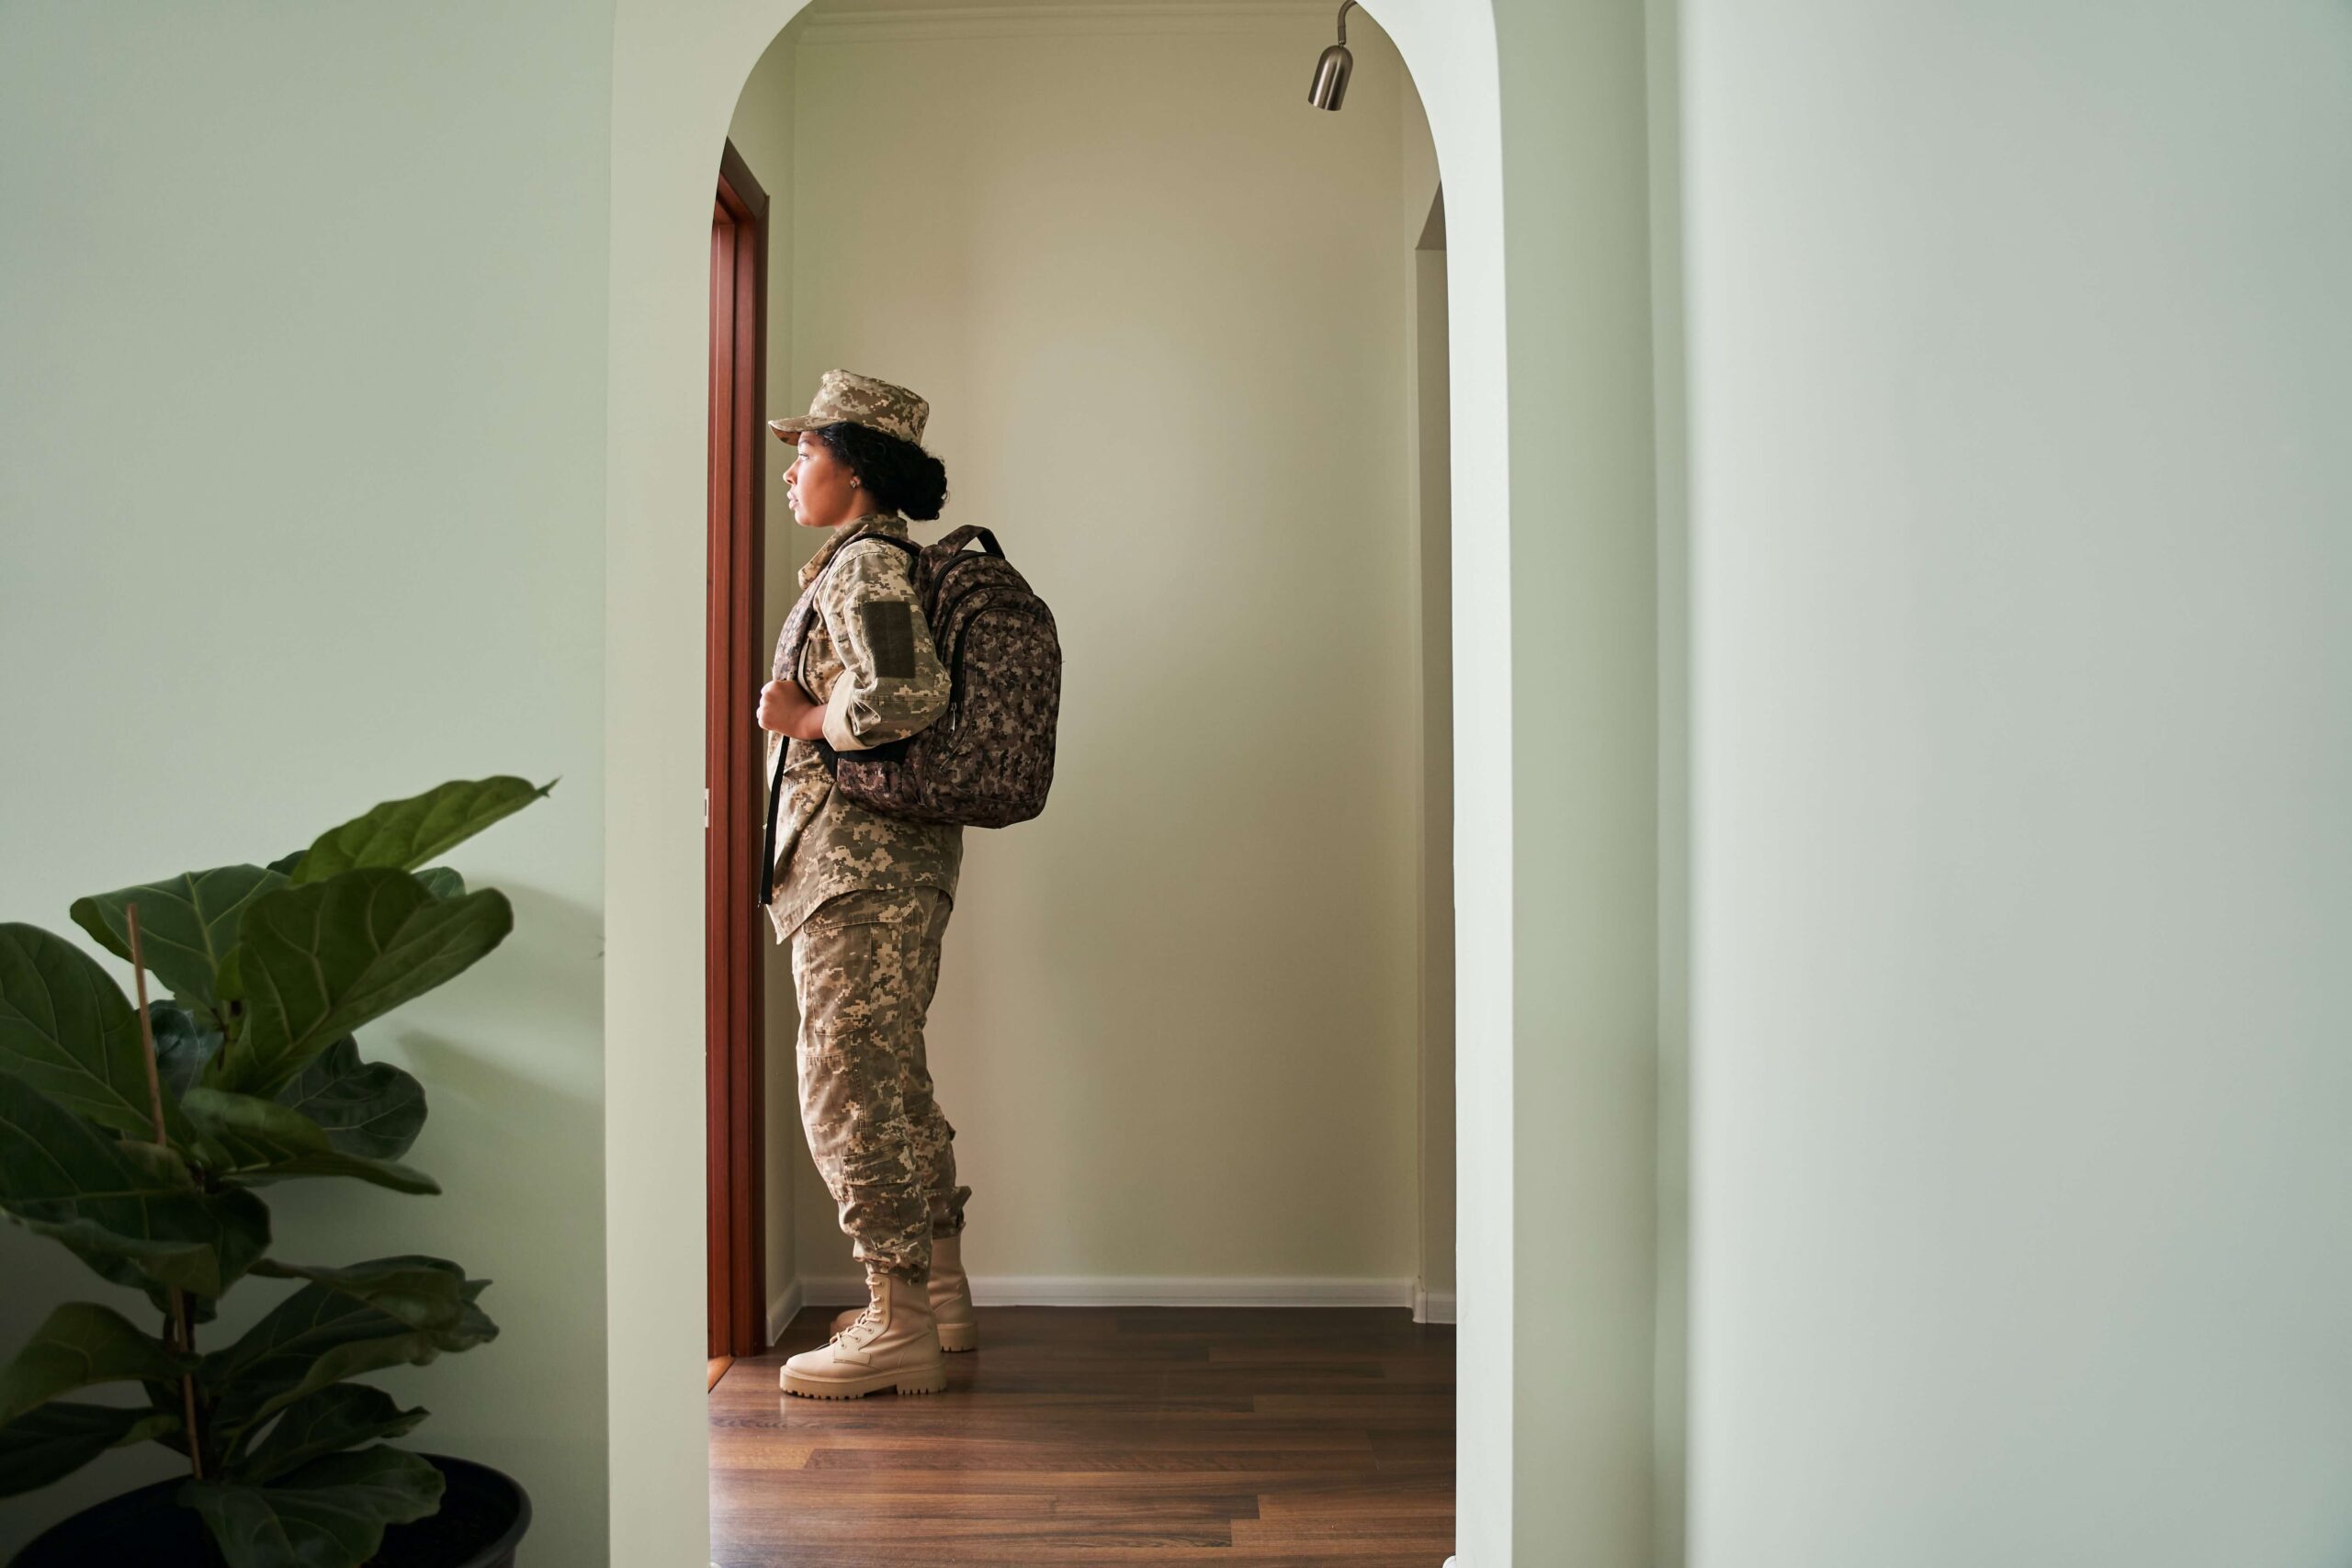 A service member in uniform wears a backpack and stands in front of a door, getting ready to leave the house.